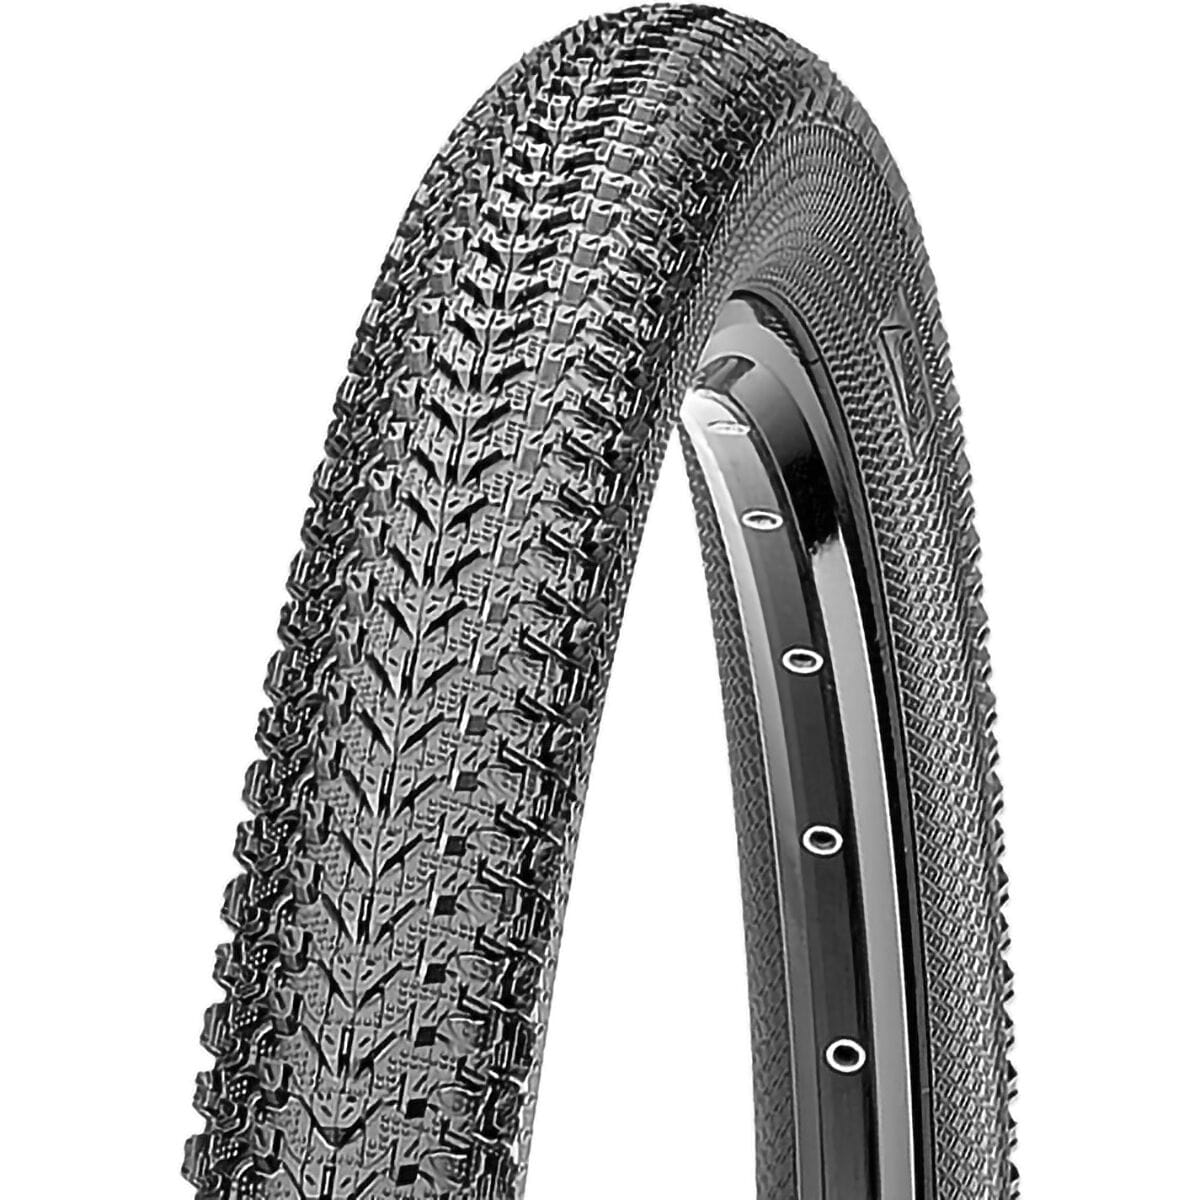 Maxxis Pace Dual Compound EXO/TR 29in Tire Black/F60, 29x2.10